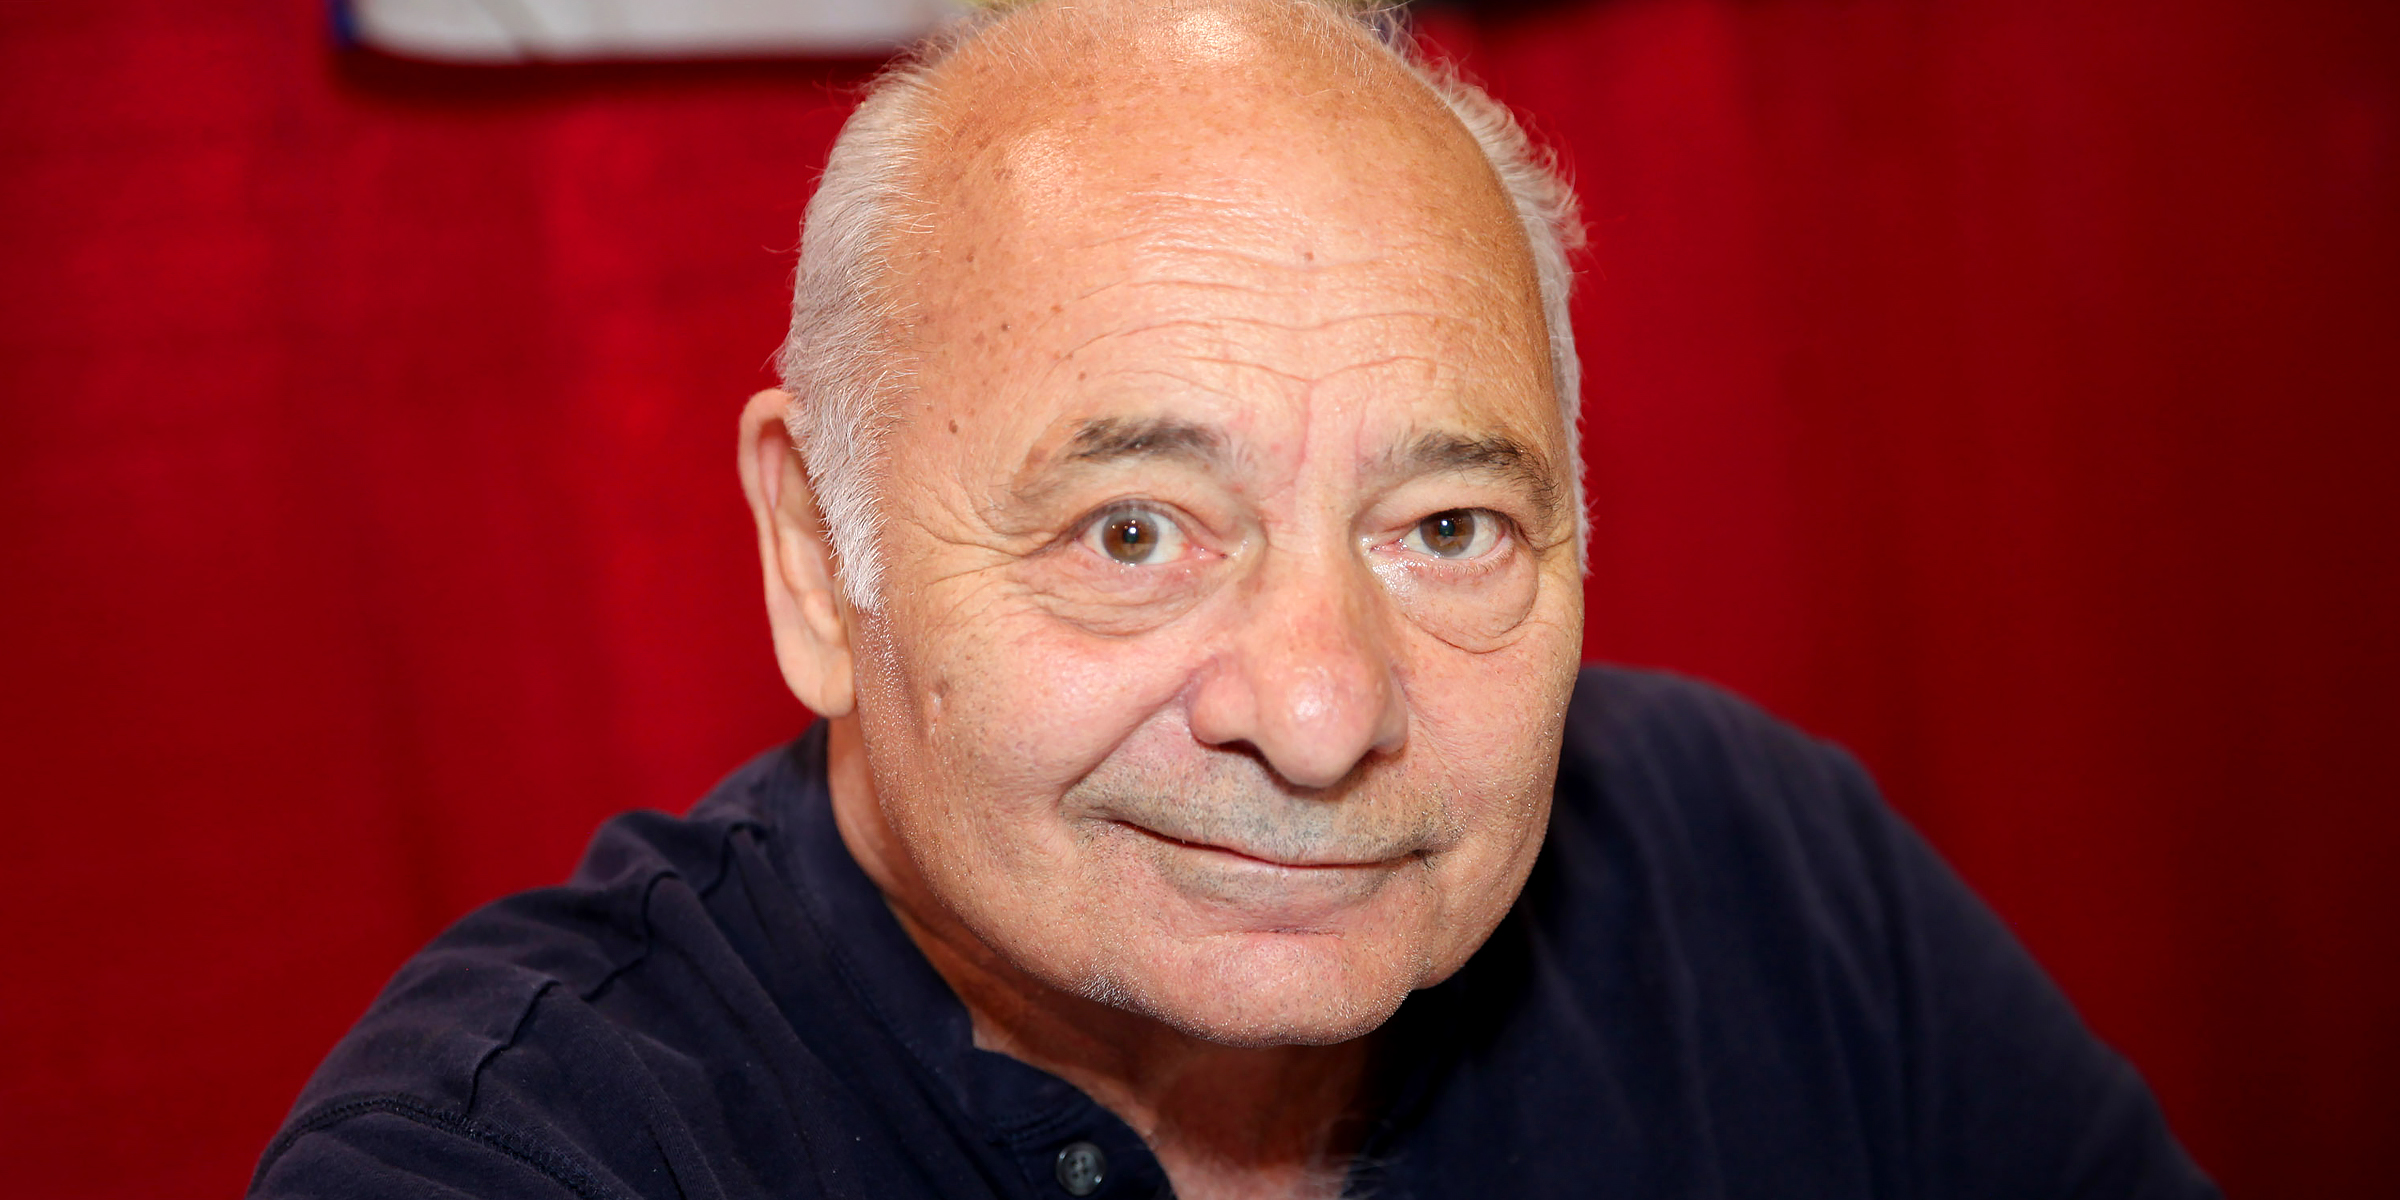 Burt Young | Quelle: Getty Images